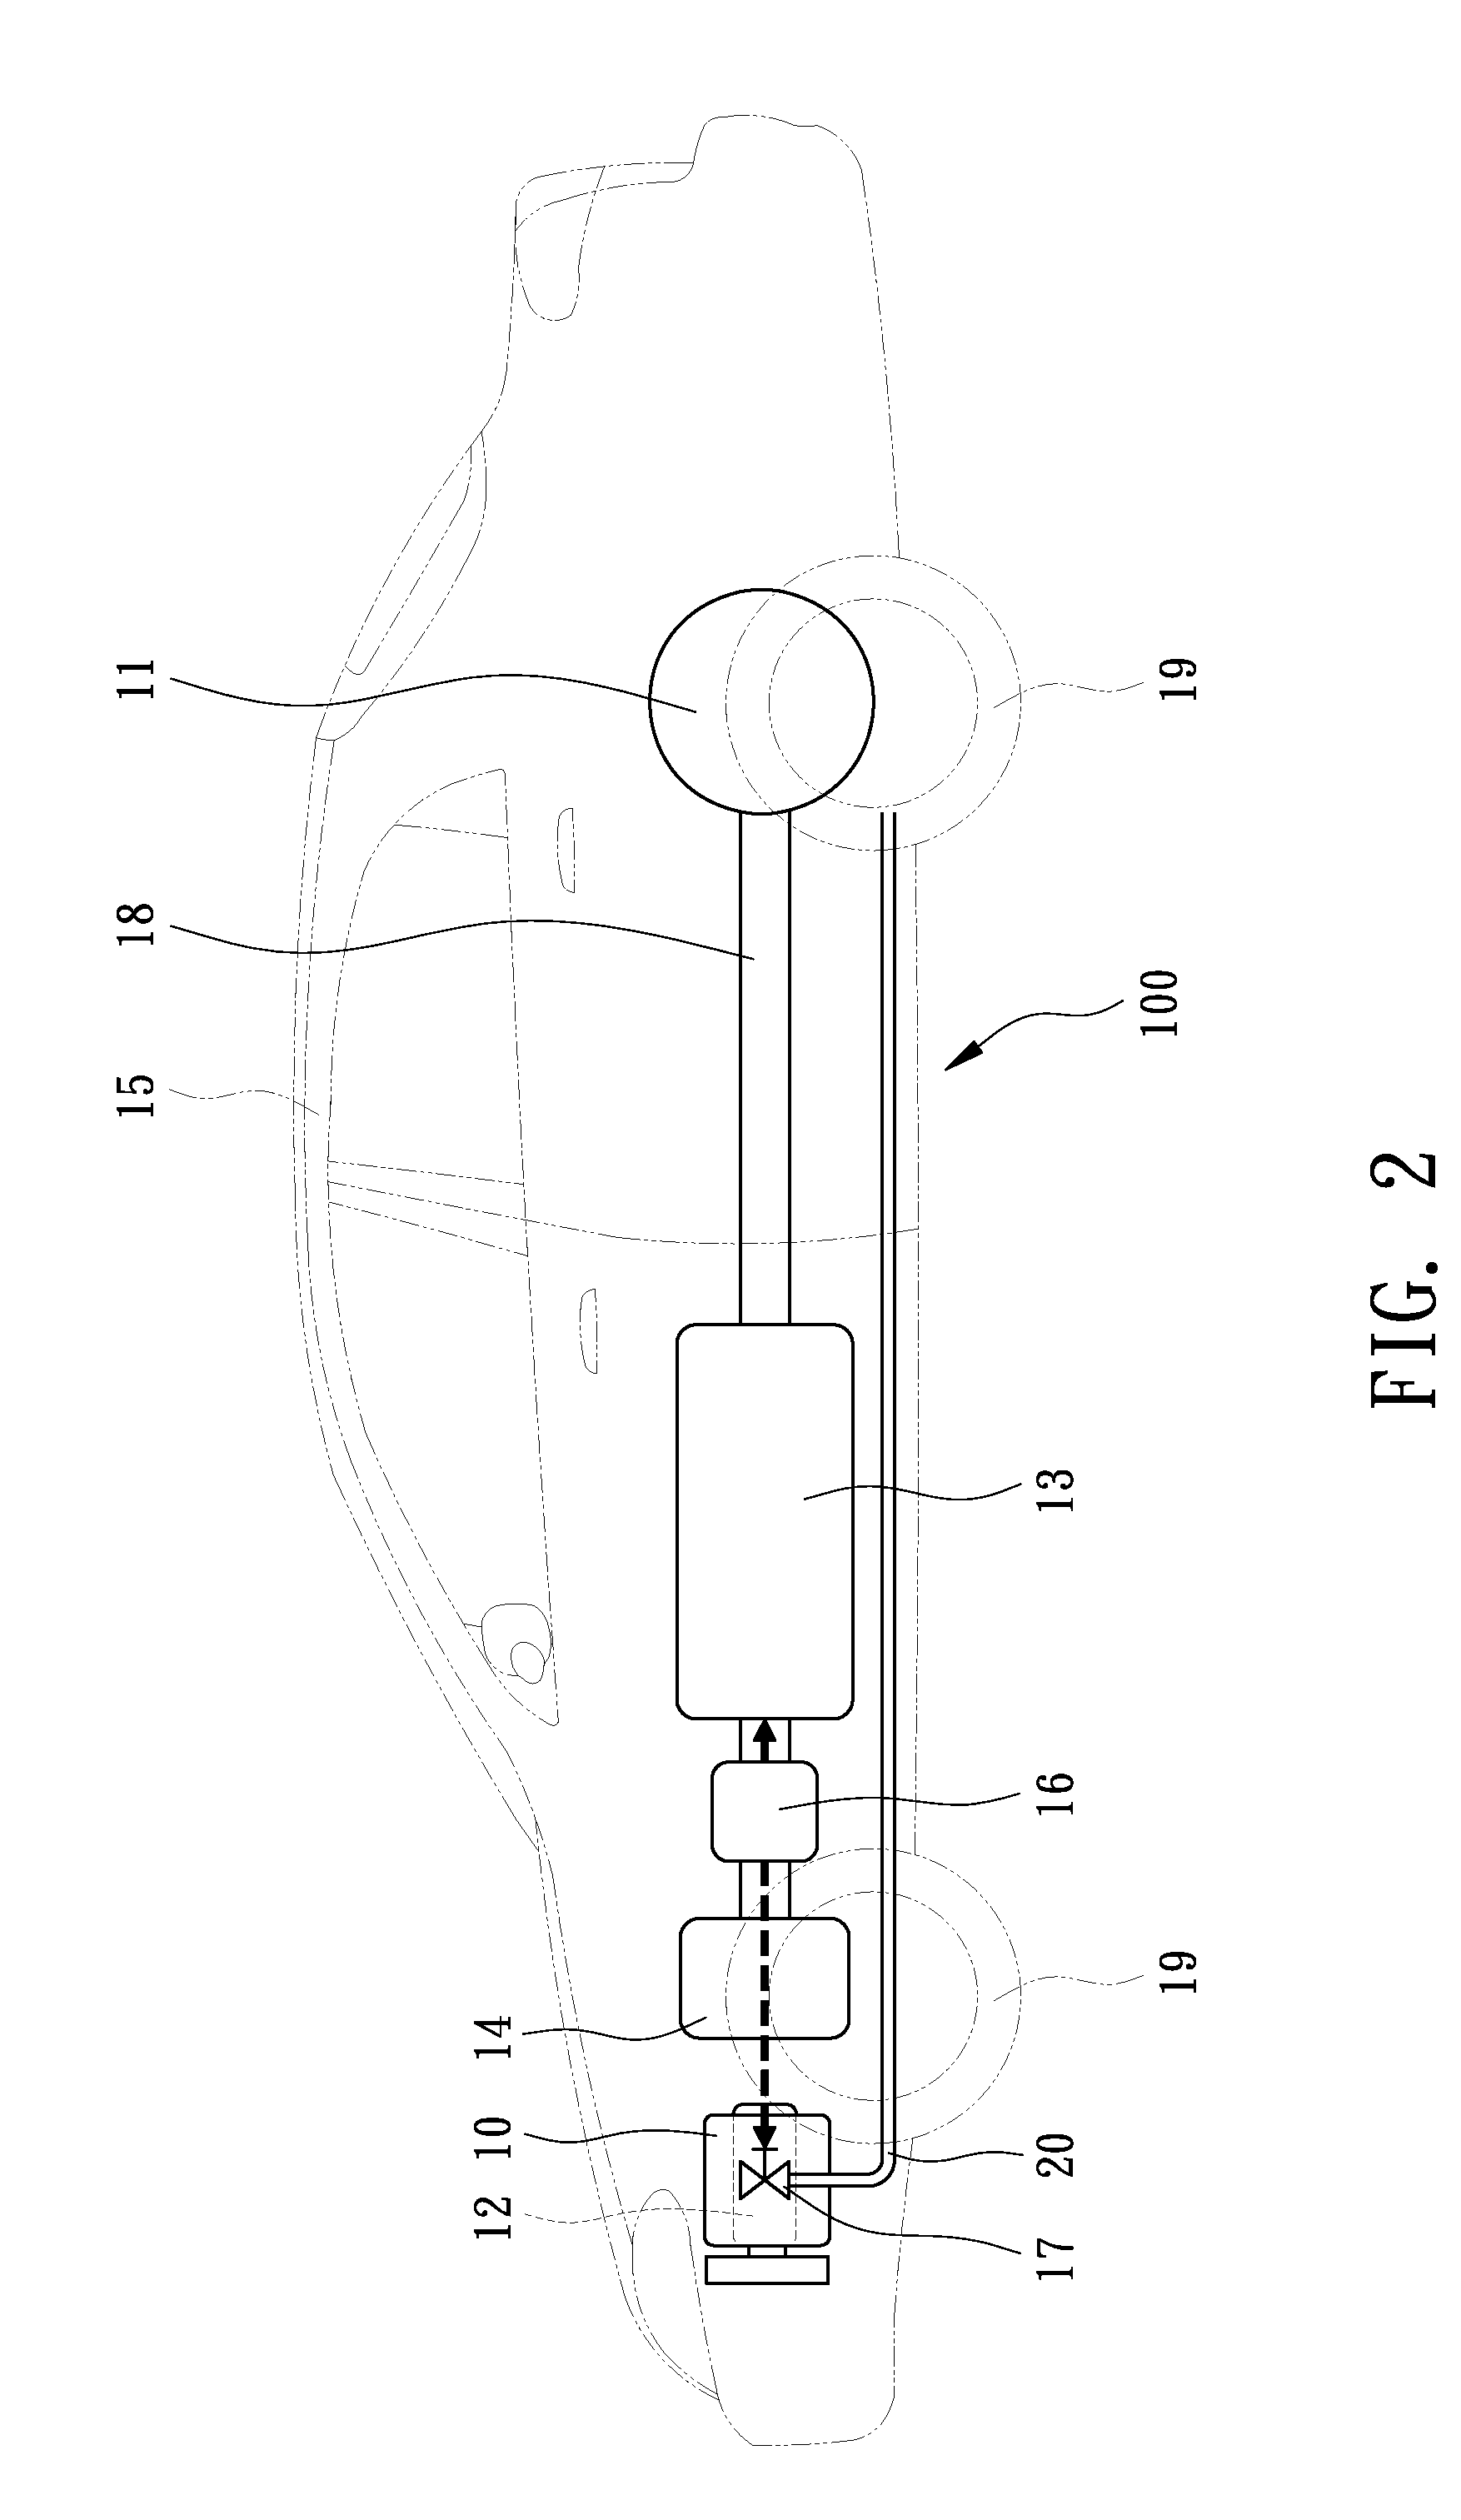 Hybrid power and electricity system for electric vehicles